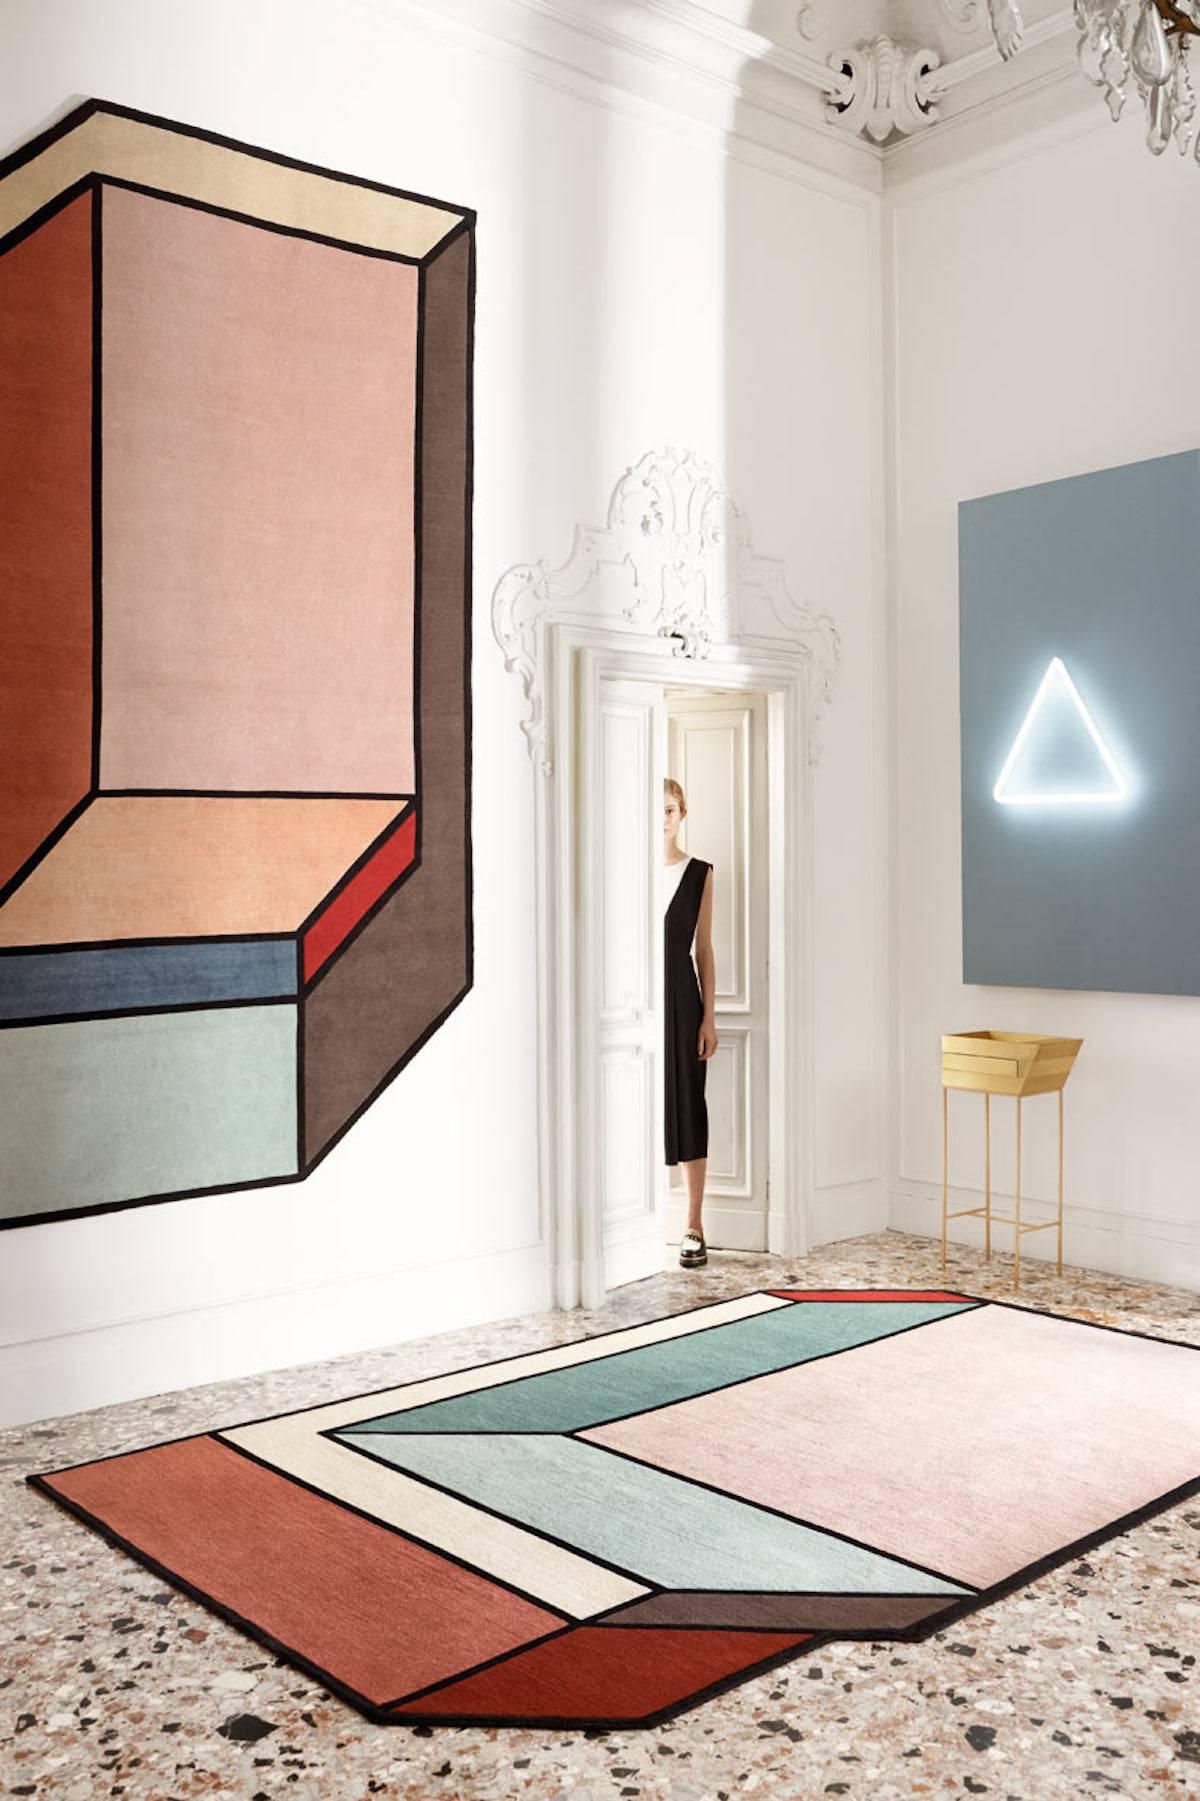 Visioni, the new rugs by Patricia Urquiola for cc-tapis. 

An unprecedented synthesis between an age-old technique and abstract graphics. The two rugs have been produced solely by hand with colors and materials that testify to the desire to give